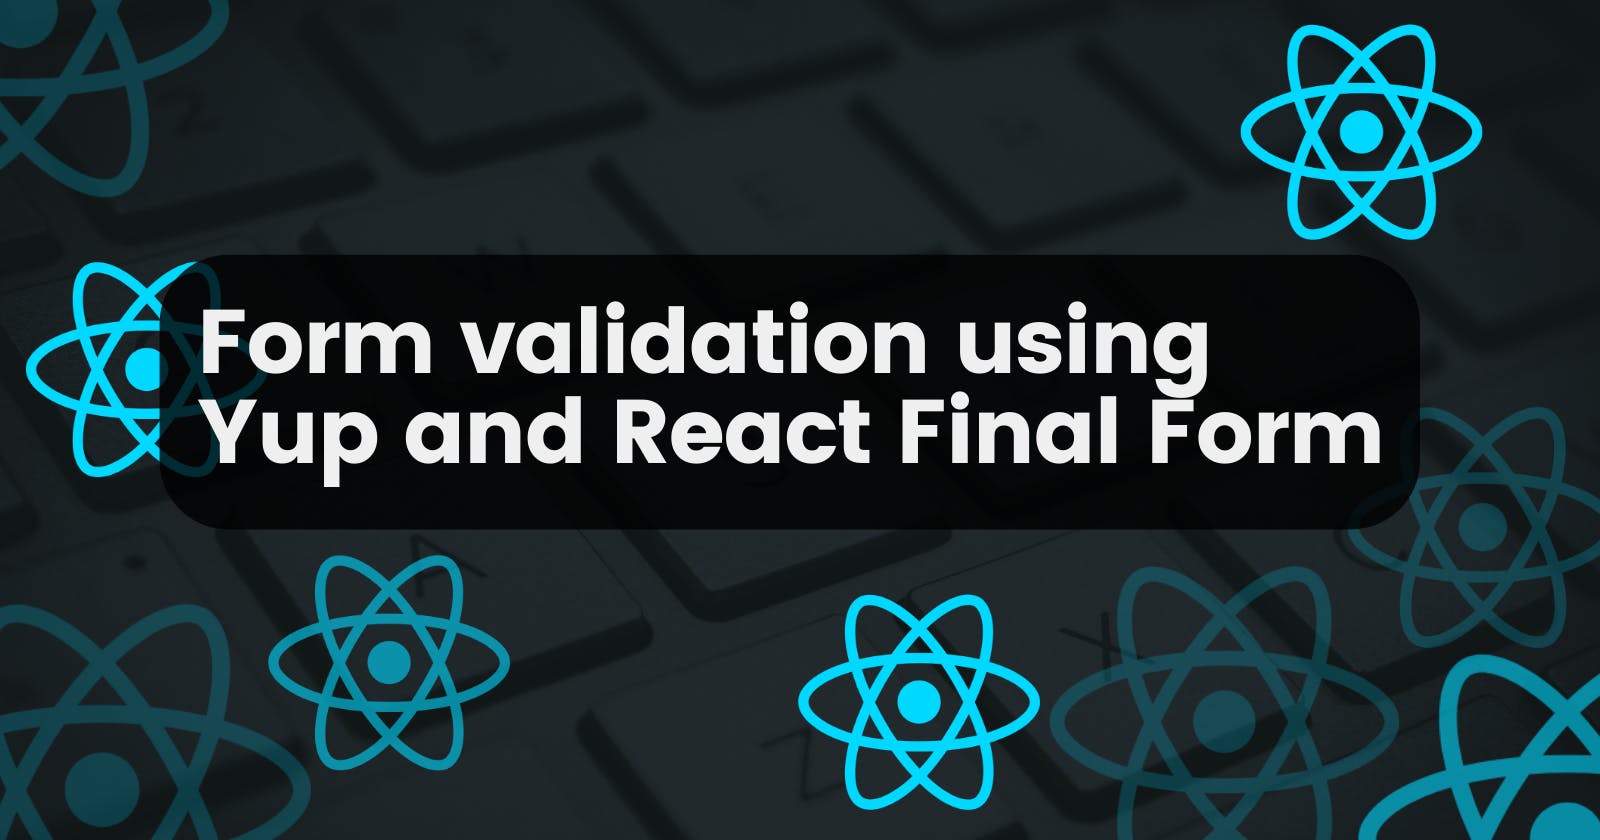 Form validation using Yup and React Final Form